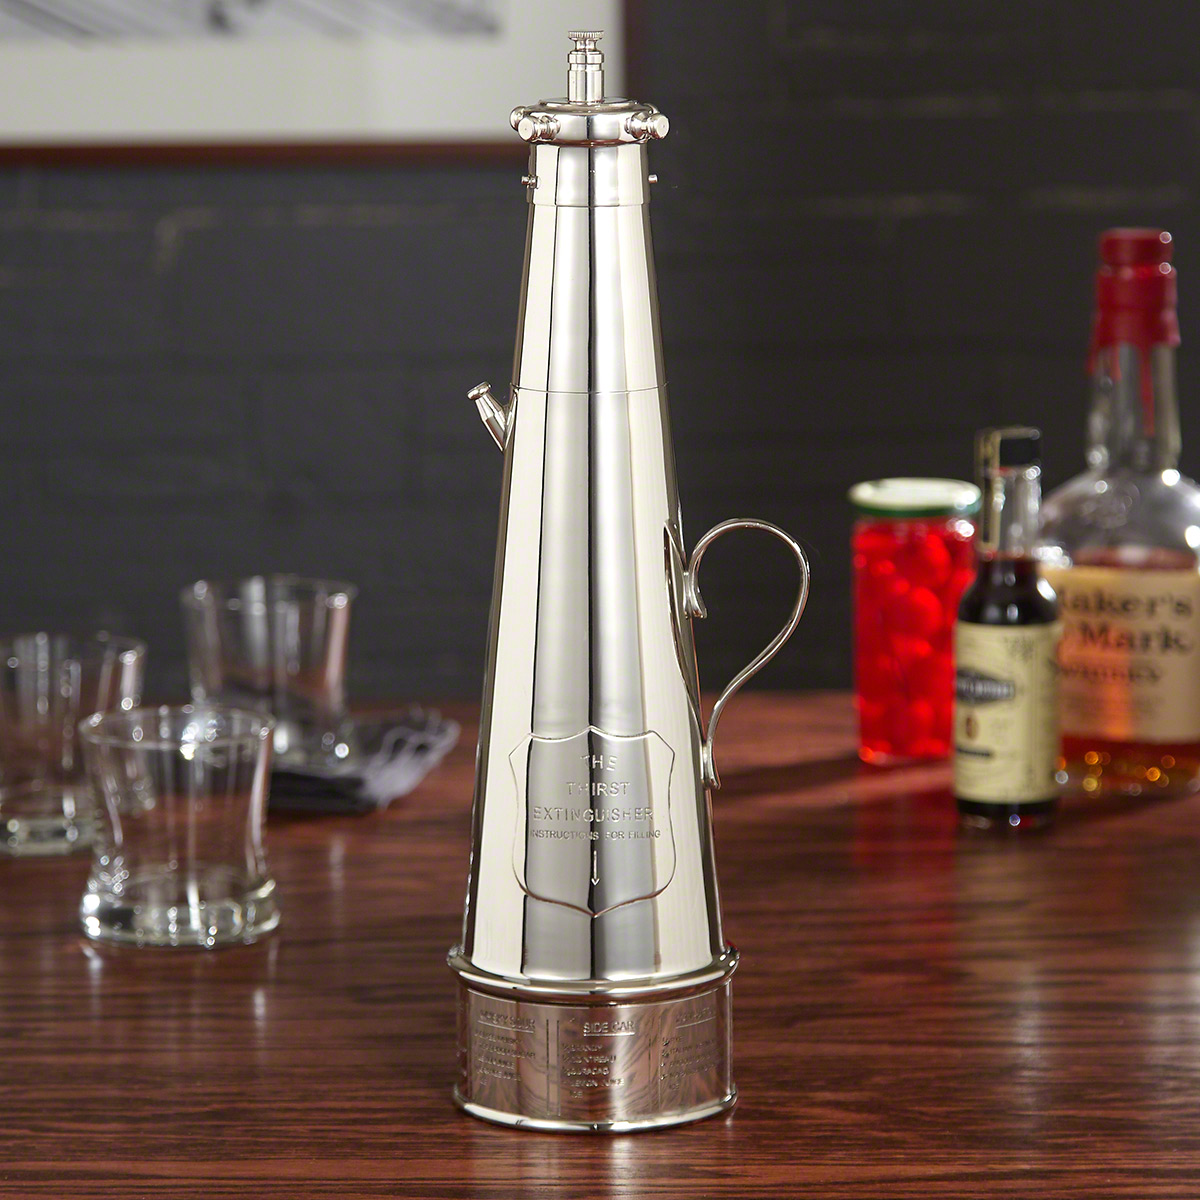 The Thirst Extinguisher Silver-Plated Cocktail Shaker